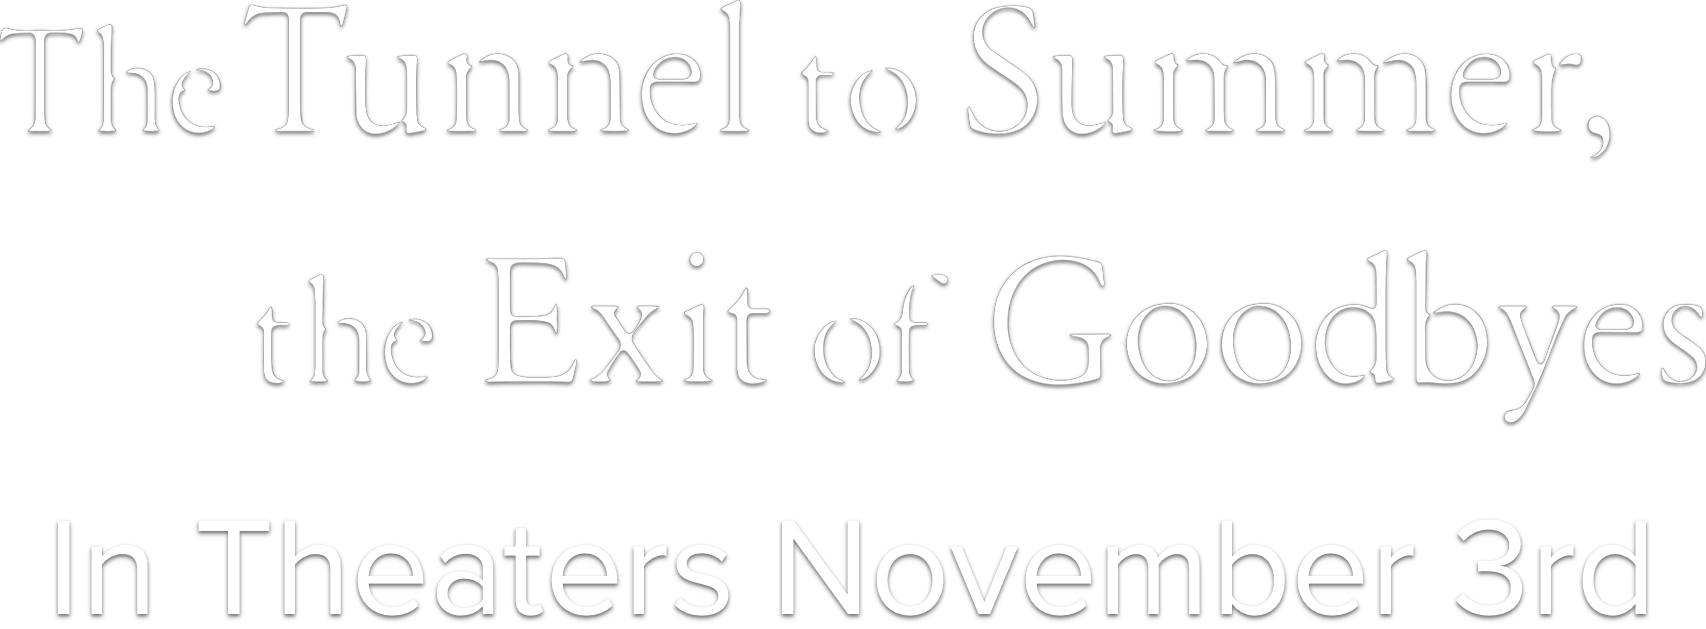 Title or logo for The Tunnel to Summer,  the Exit of Goodbyes